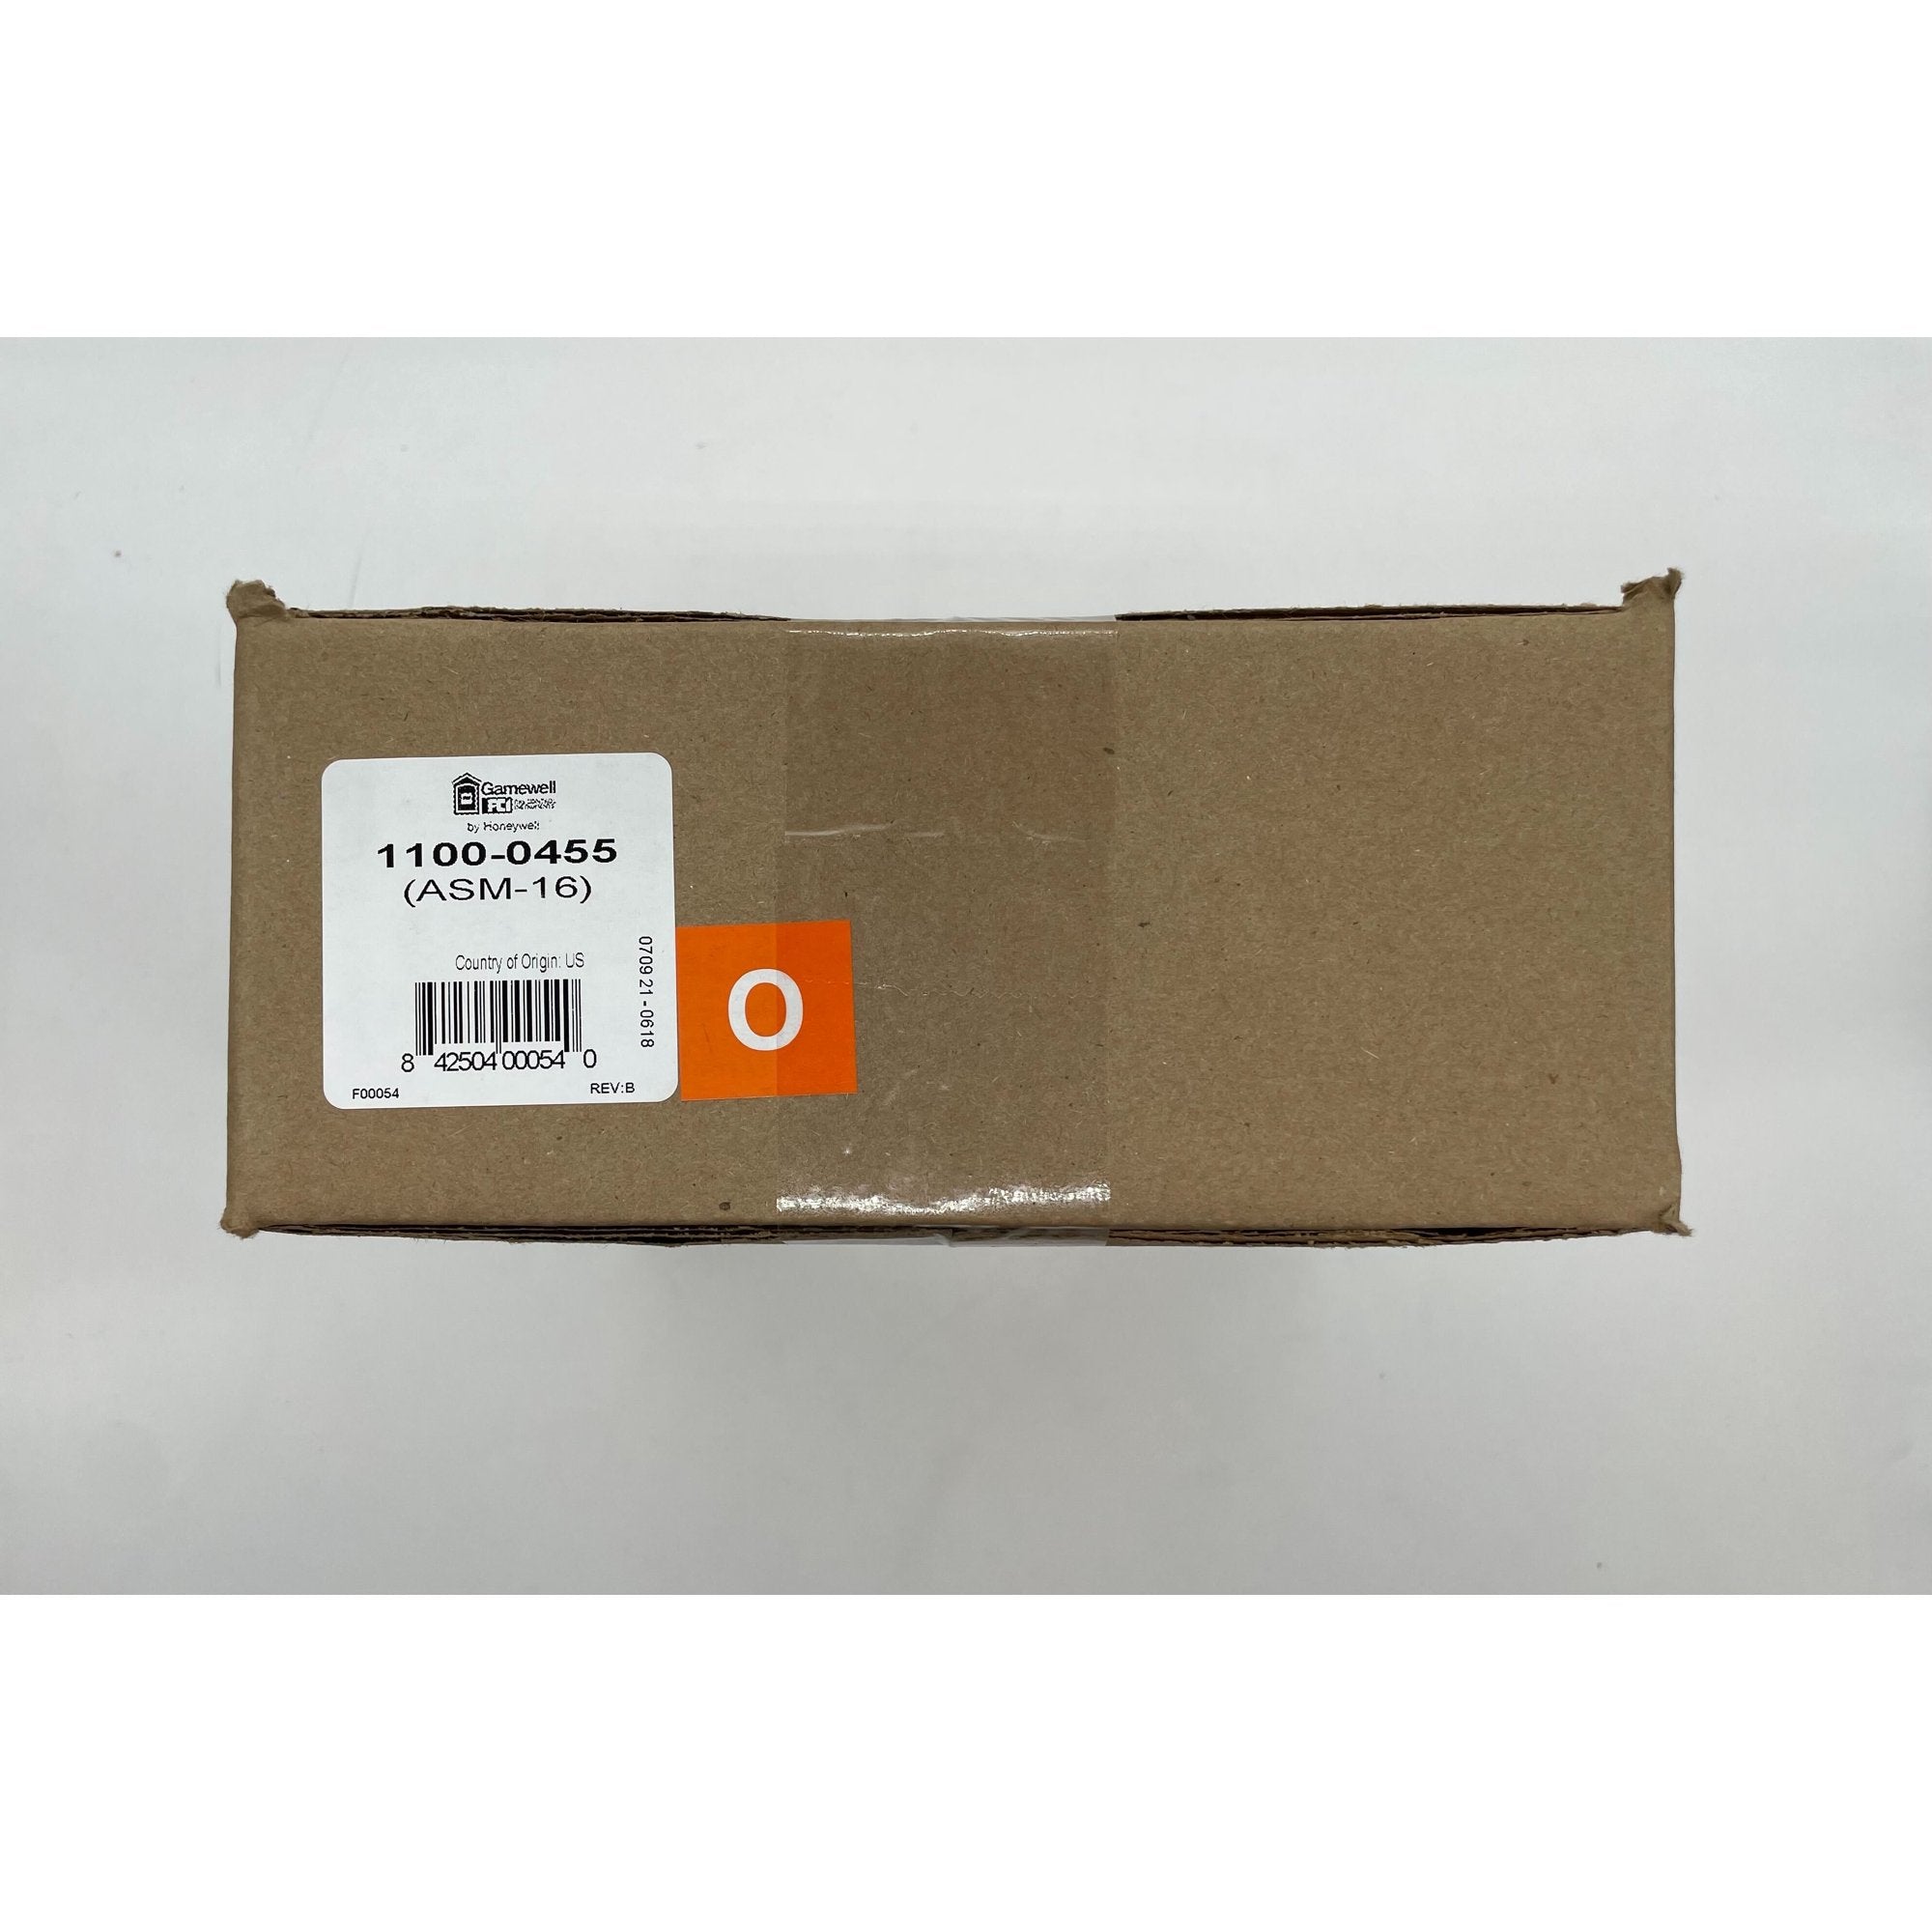 Gamewell-FCI 1100-0455 (ASM-16) - The Fire Alarm Supplier